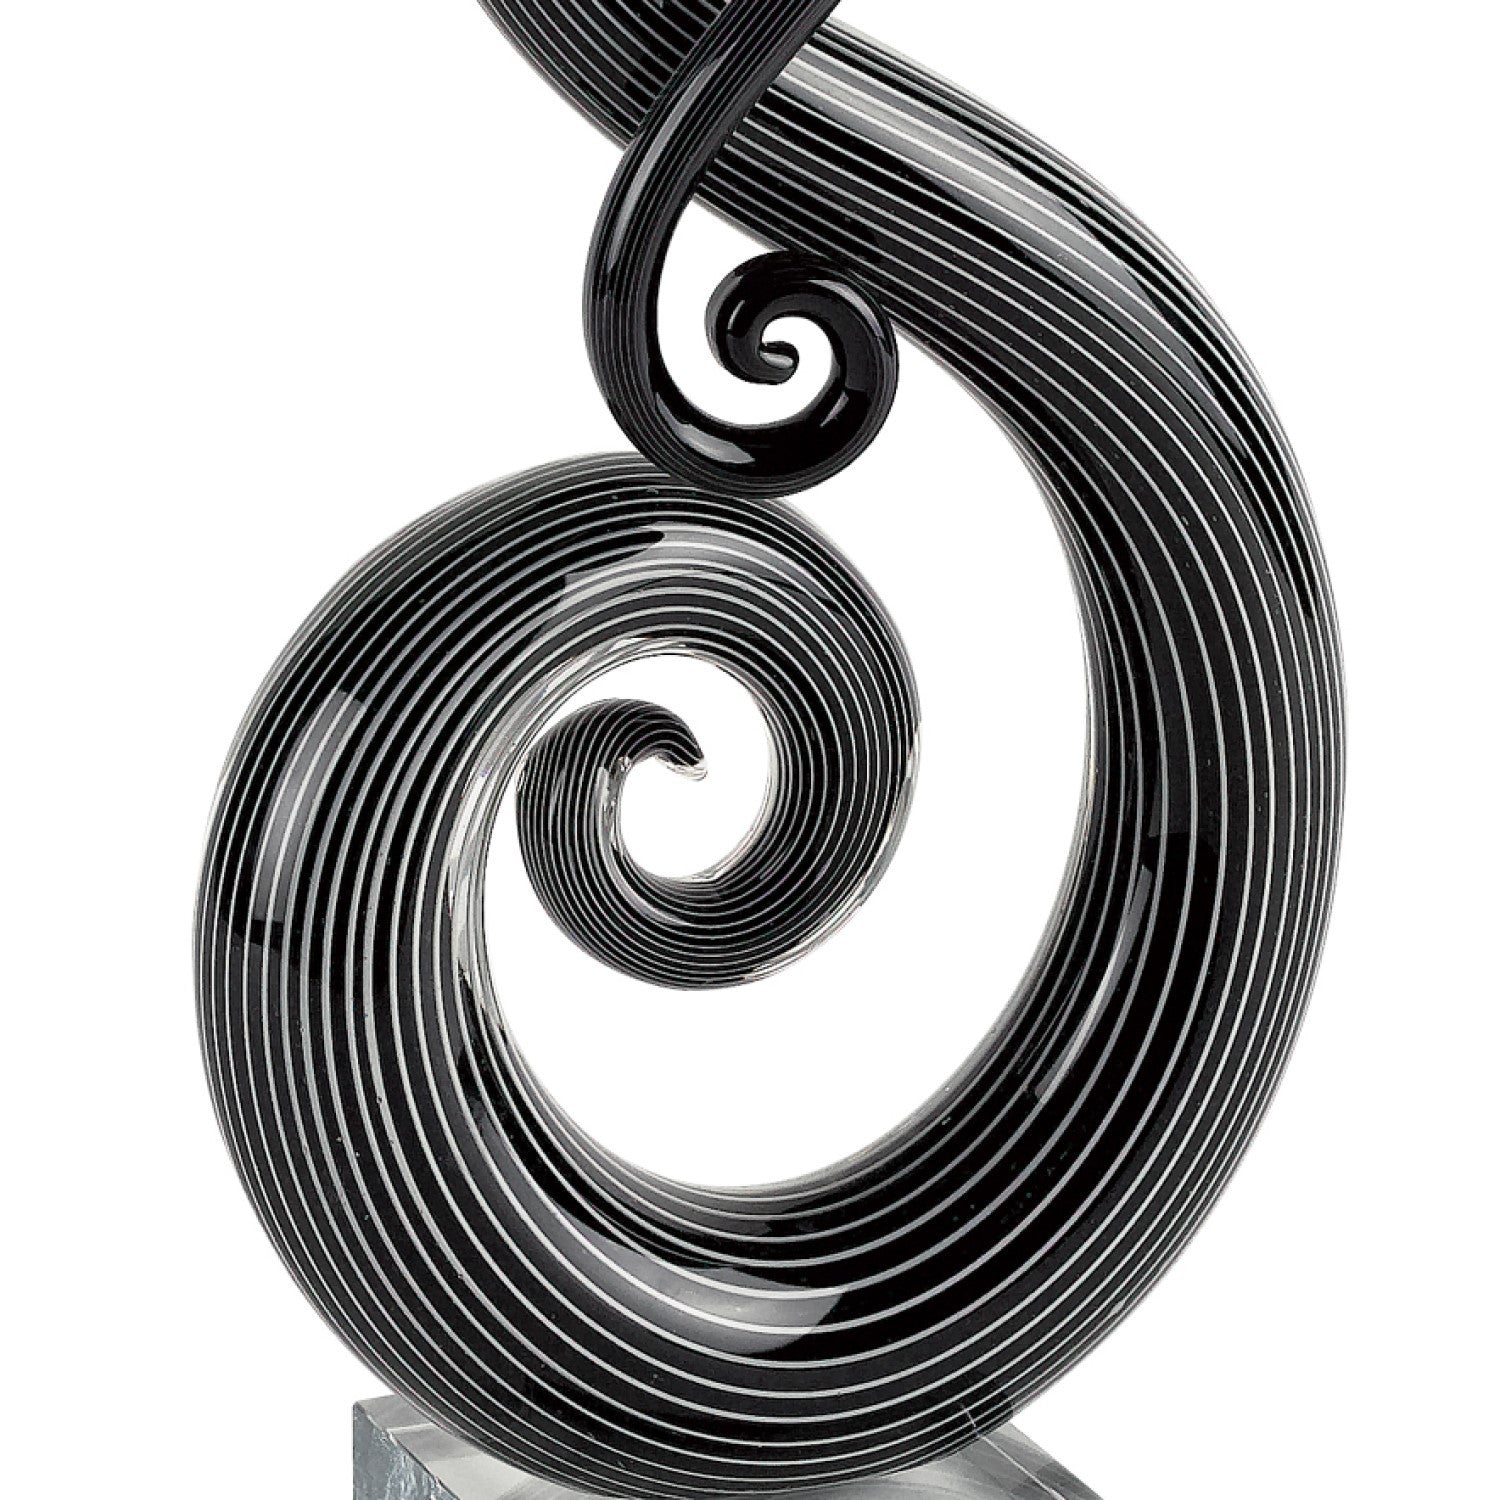 12" Black and White Murano Glass Modern Abstract Tabletop Sculpture